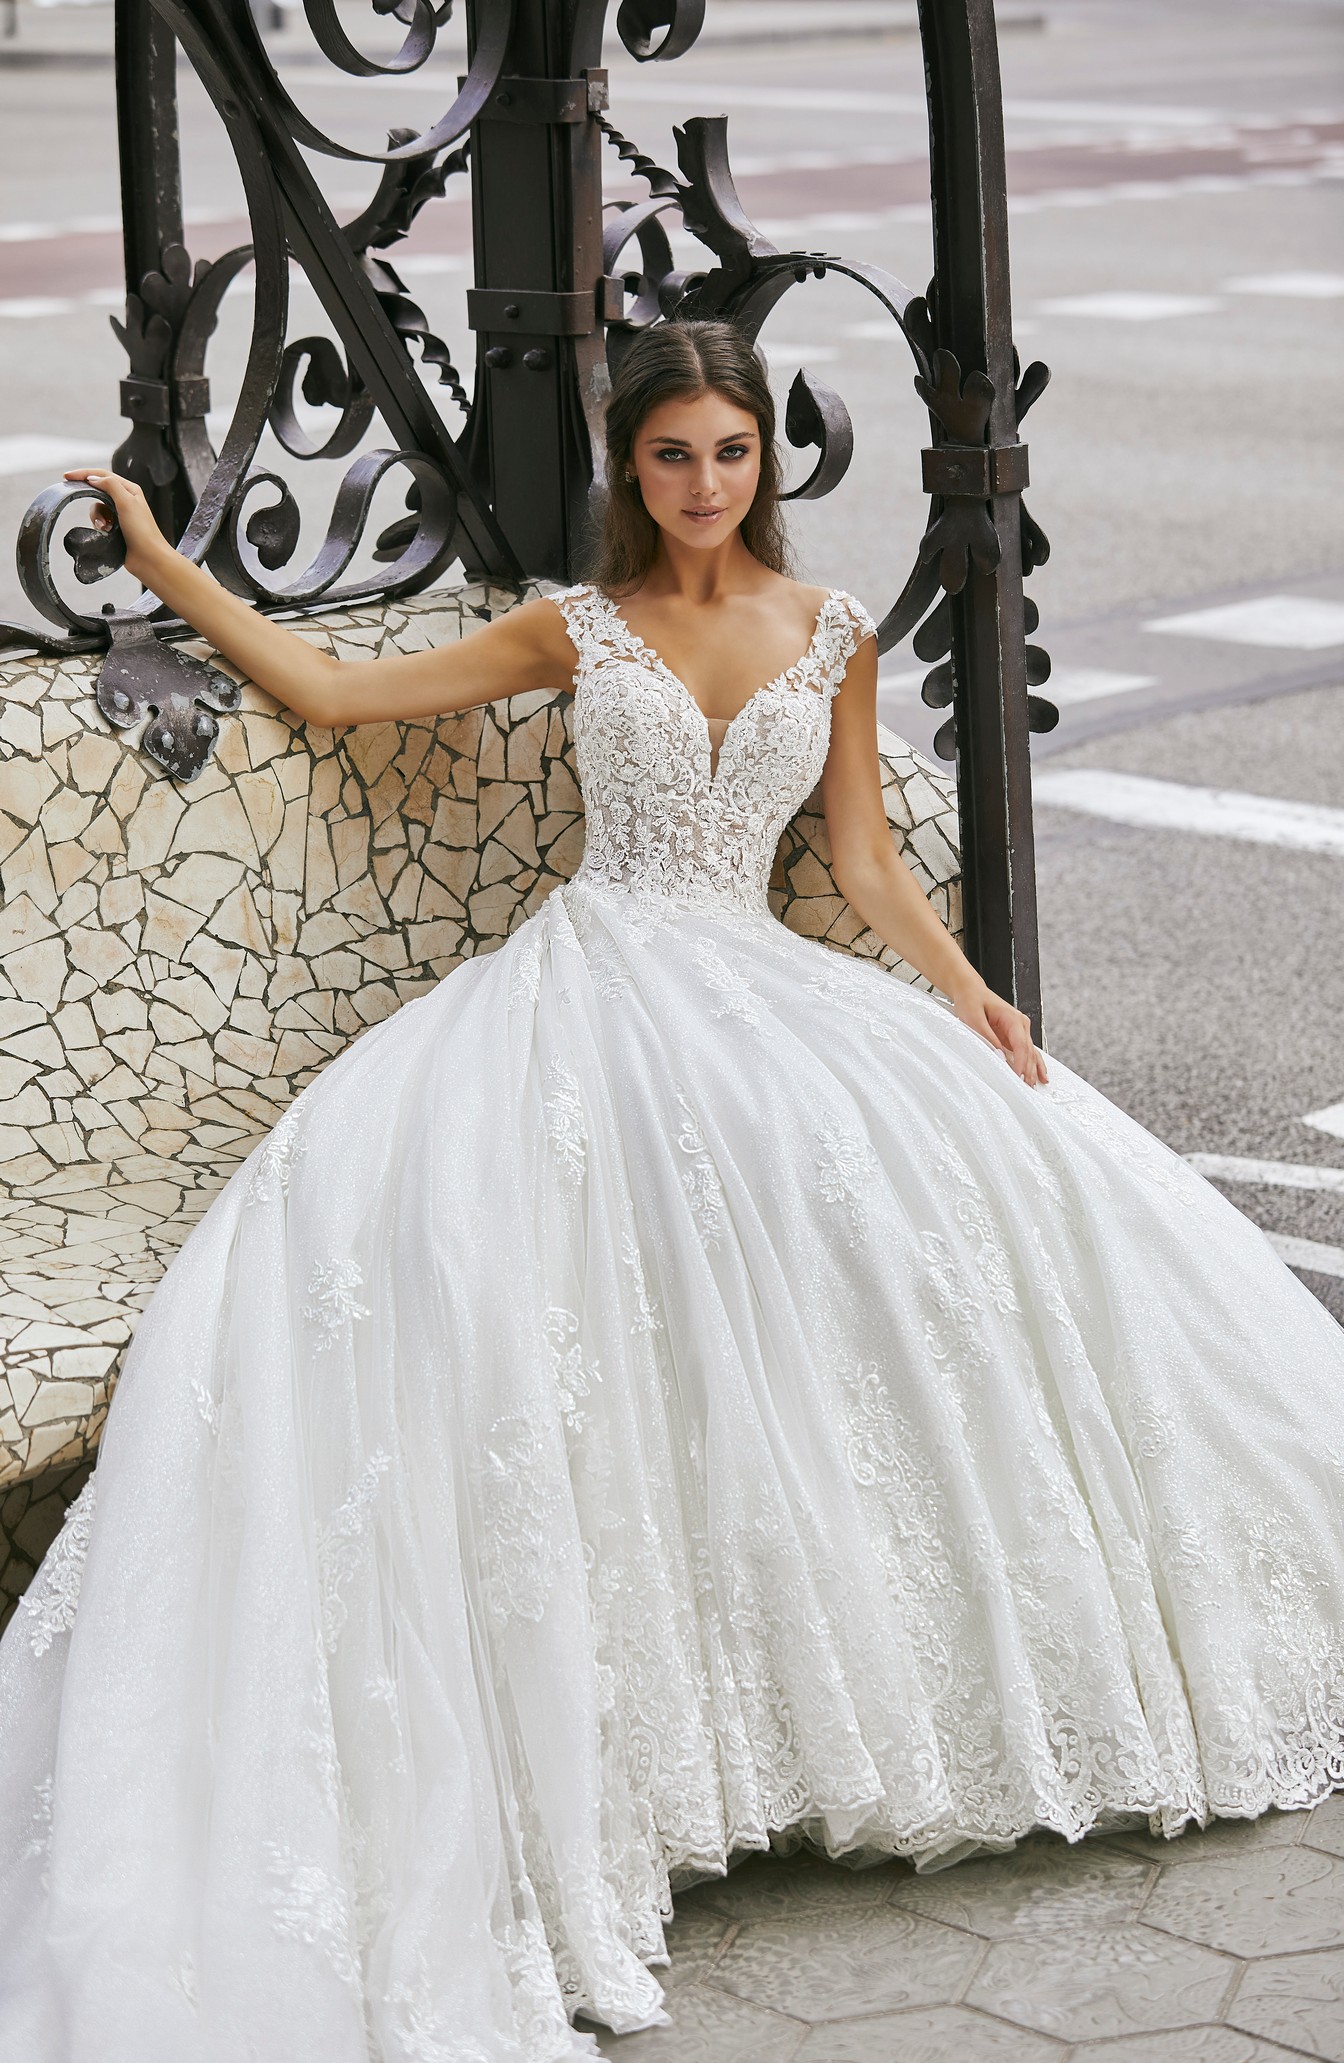 Brunette woman sitting on decorative street bench in Barcelona wearing princess style ballgown wedding dress with lace applique straps